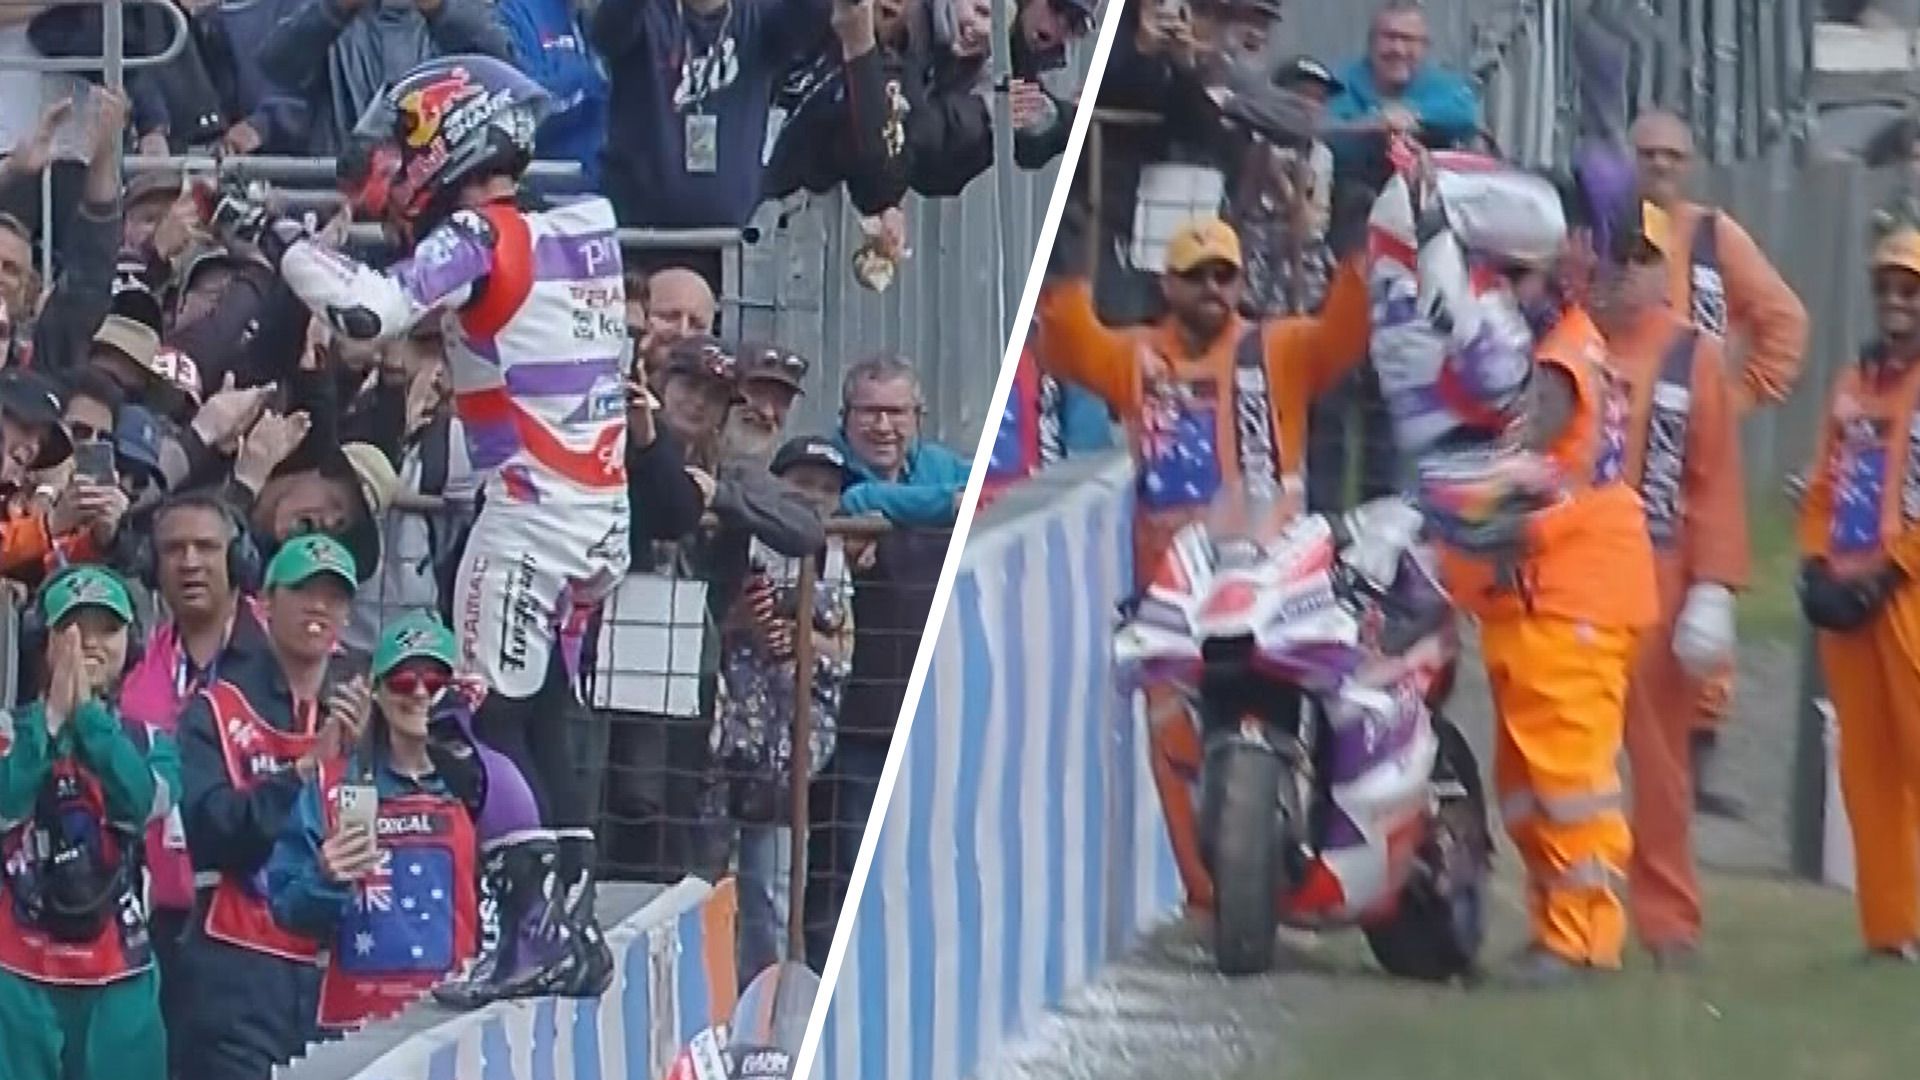 Johann Zarco celebrated his maiden MotoGP victory in the Australian Grand Prix by doing a backflip off a fence.